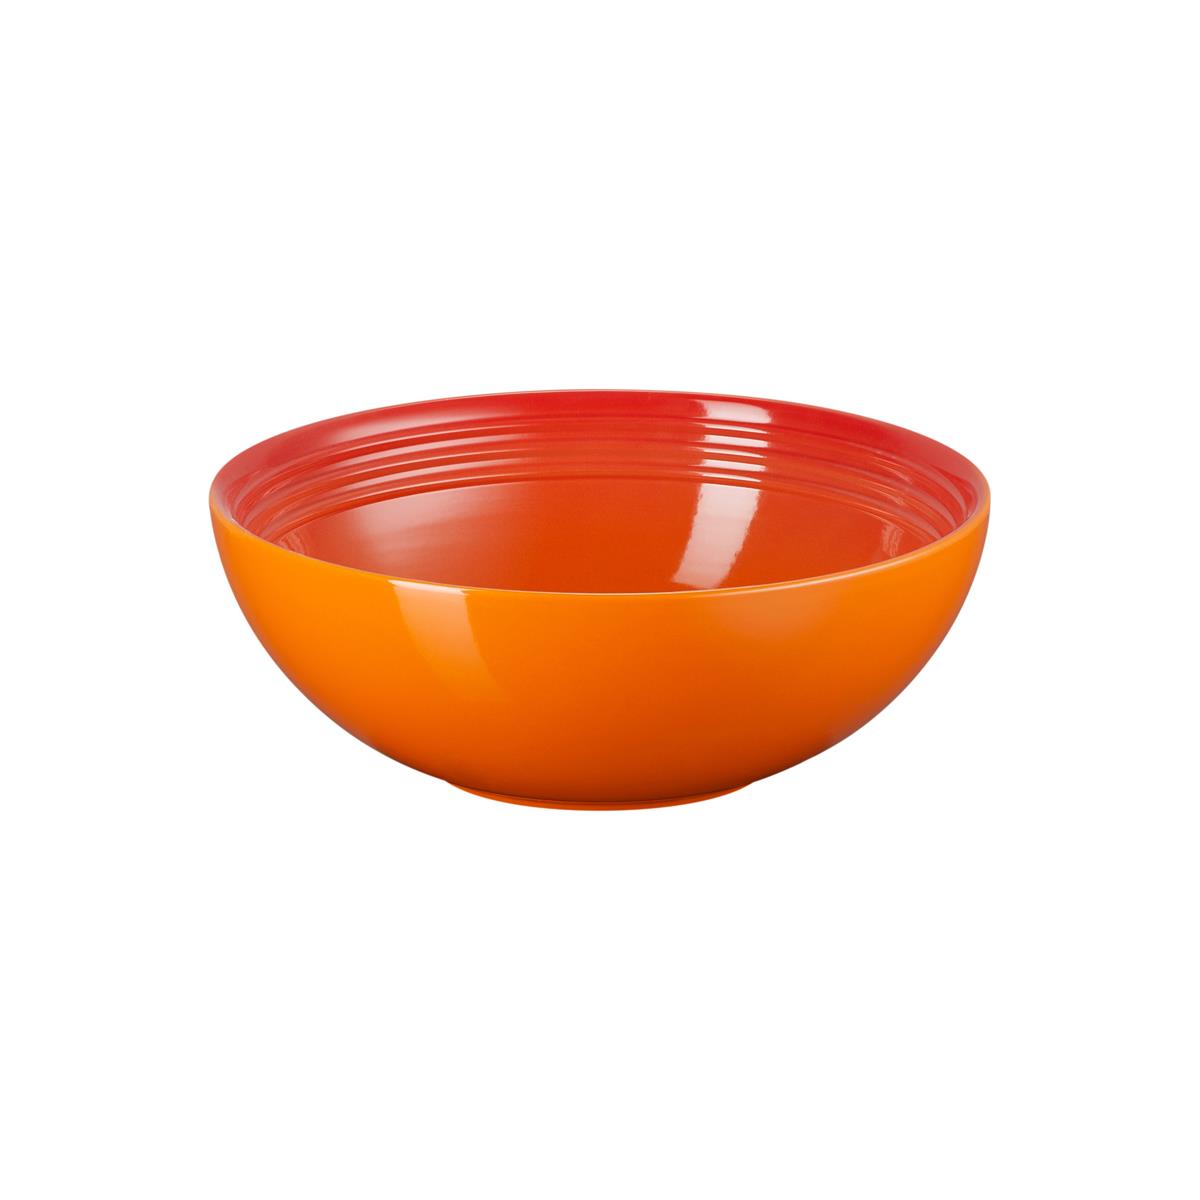 Are the Le Creuset serving bowls first quality rather than seconds?